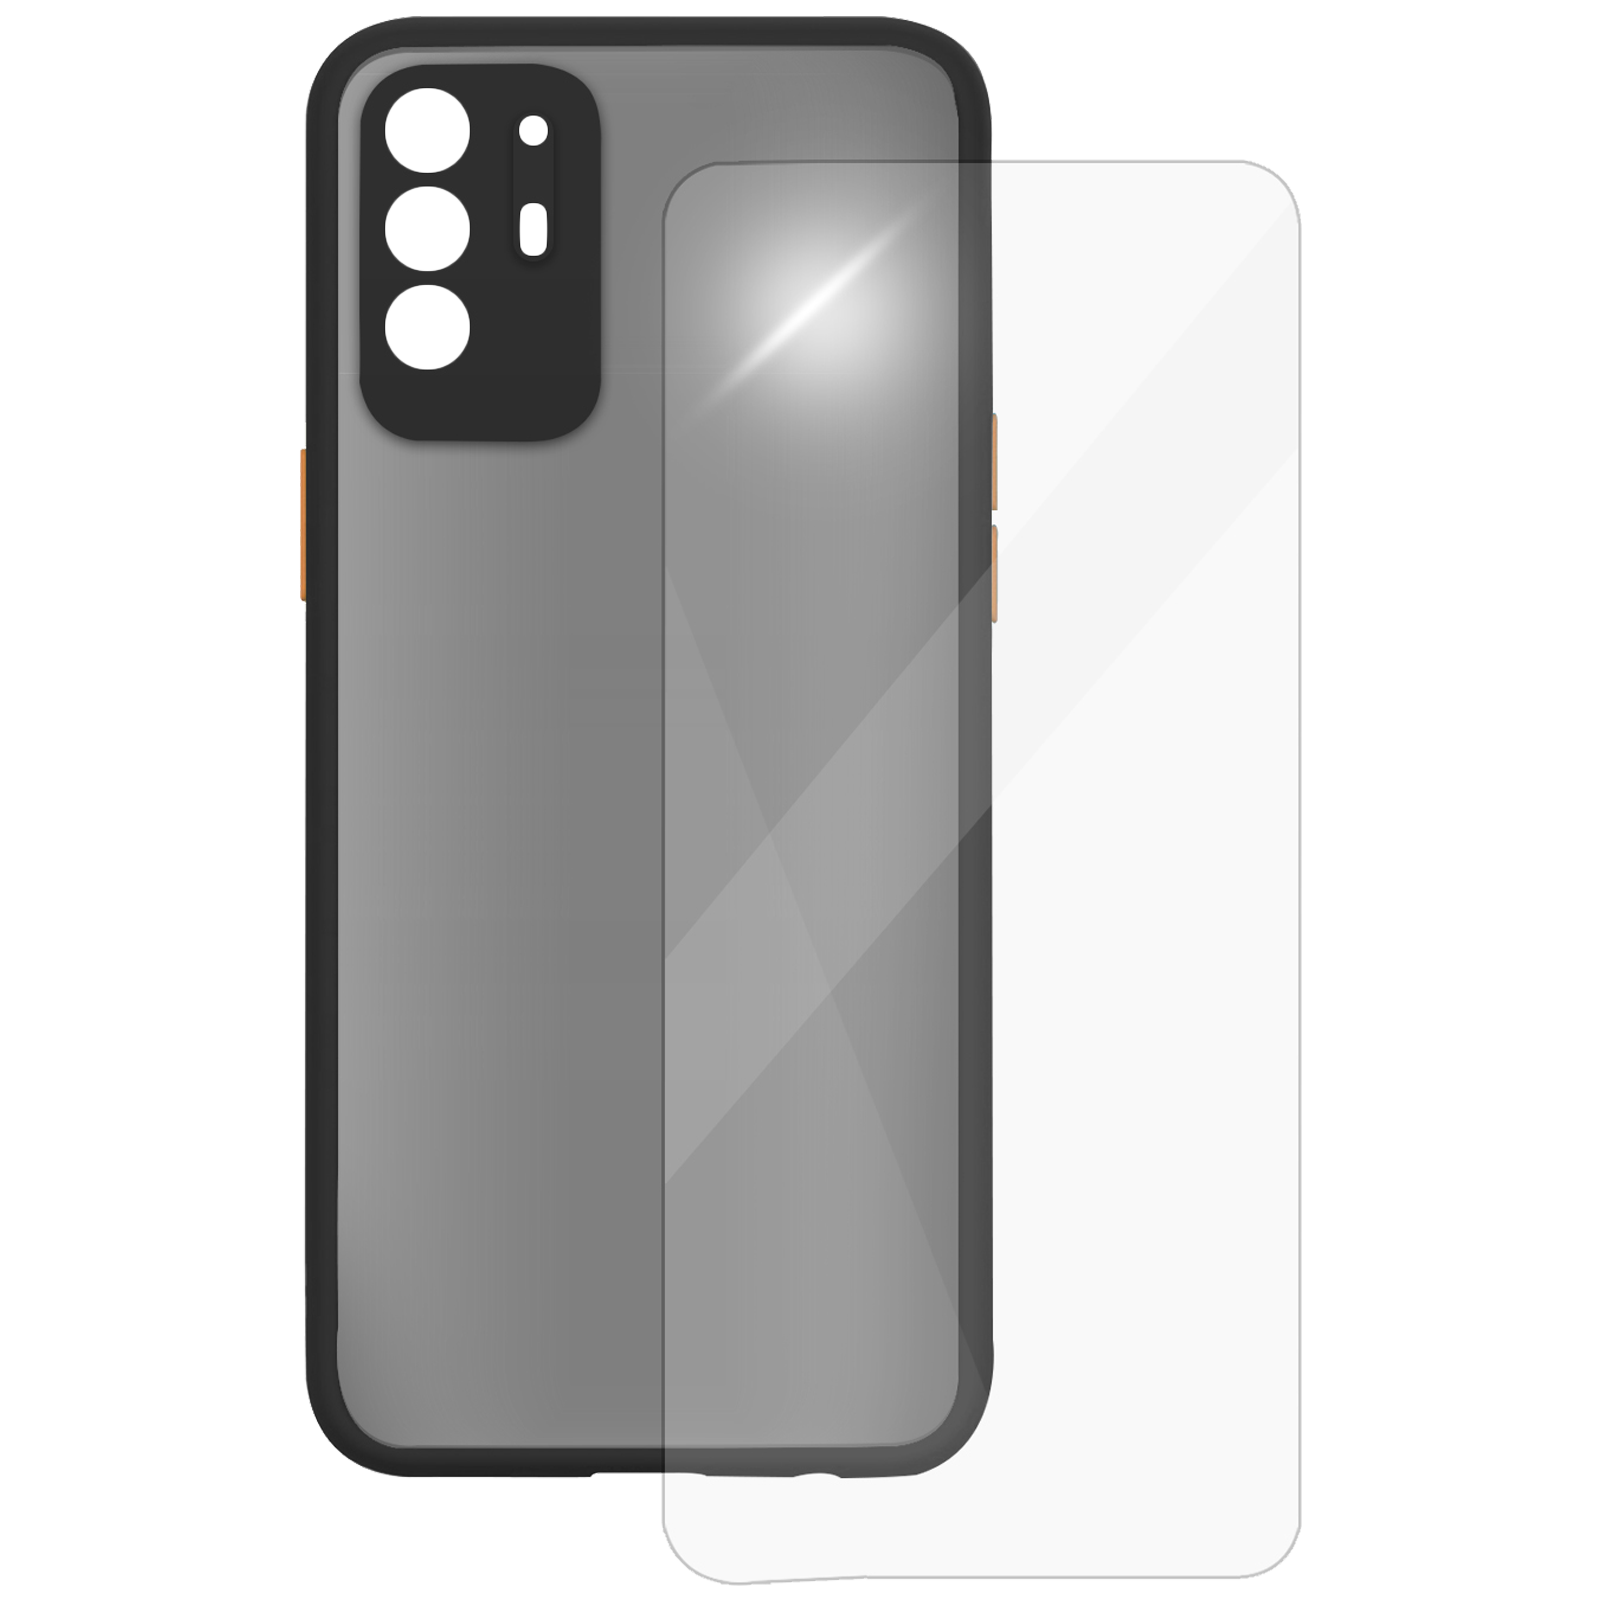 Arrow Camera Duplex Back Case and Screen Protector Bundle For Oppo F19 Pro+ (Ultra Transparent Visibility, AR-988, Black)